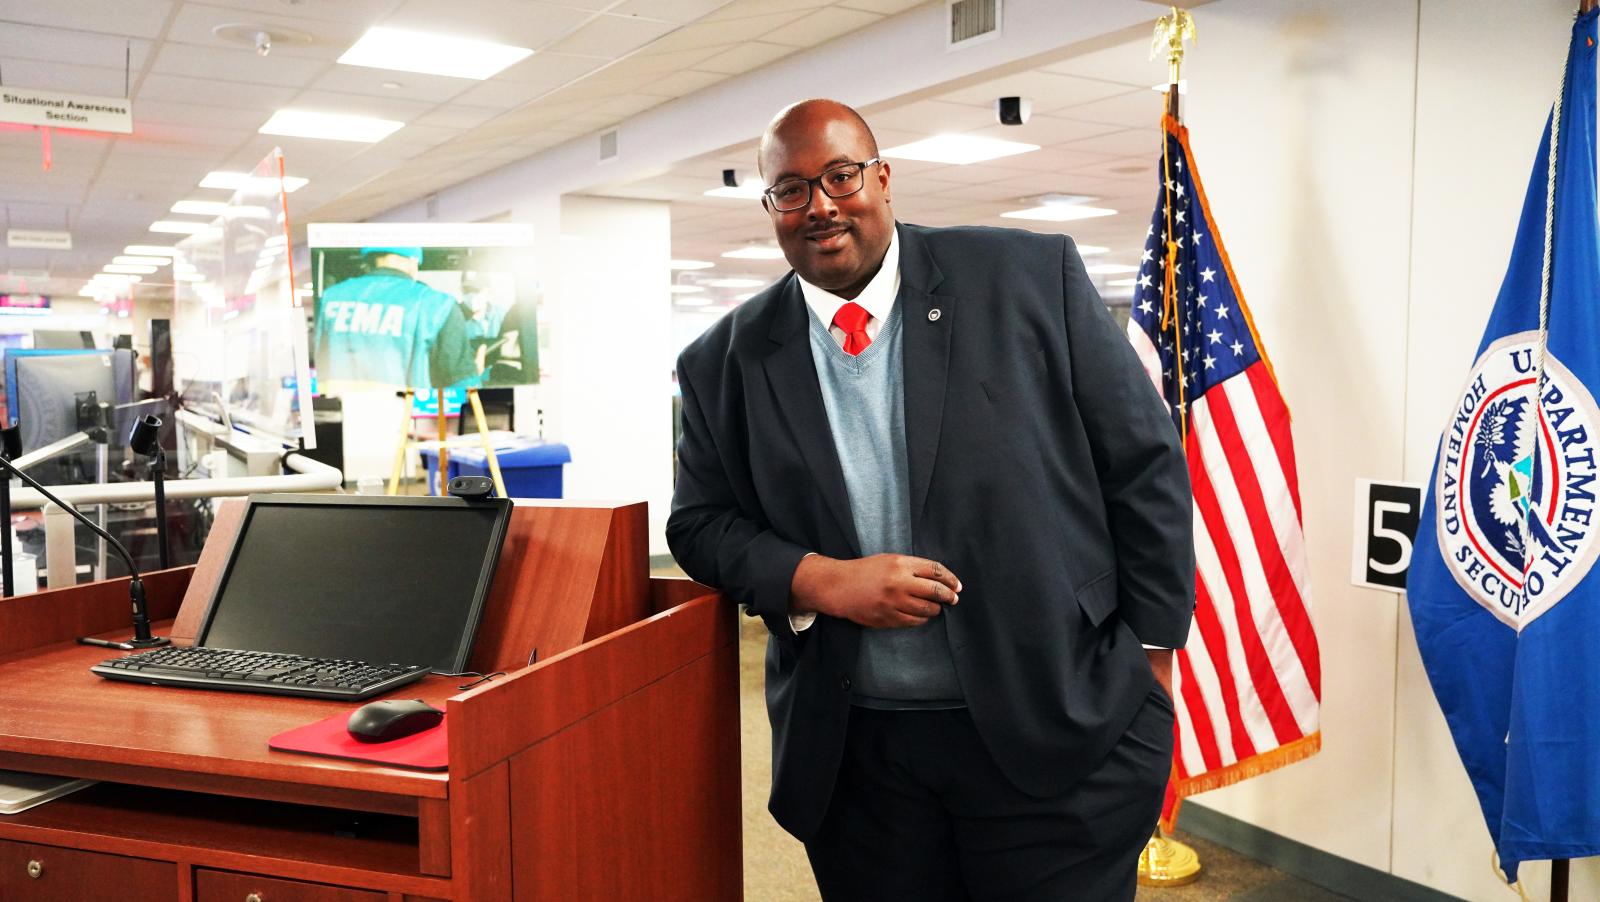 Marcus Coleman standing in suit inside FEMA offices with American flag